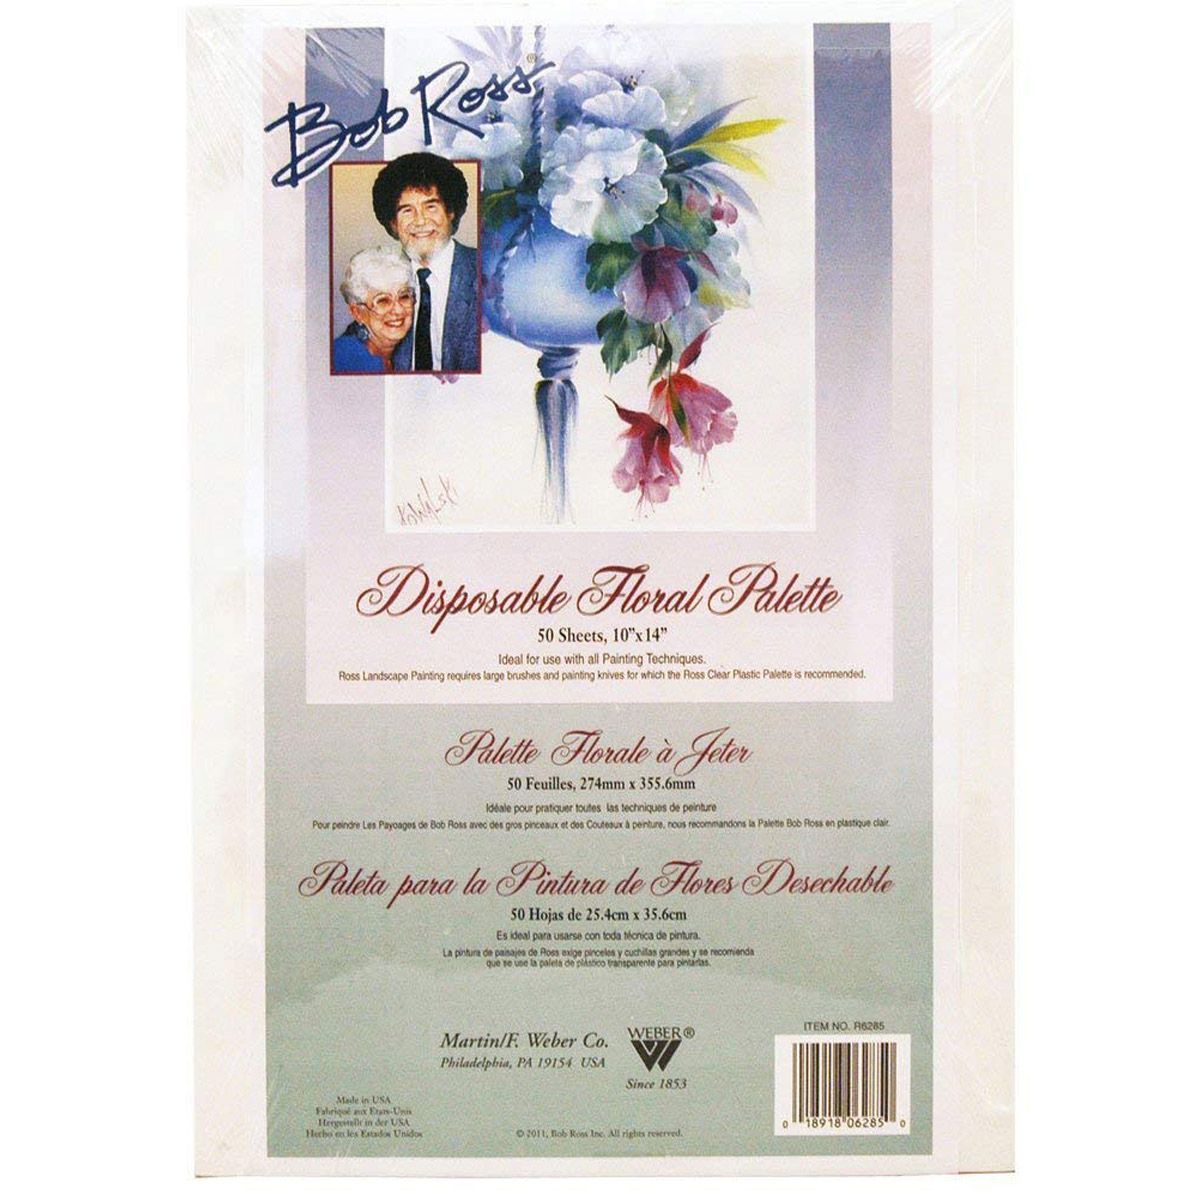 Bob Ross Disposable Palette - 10 x 14 inches